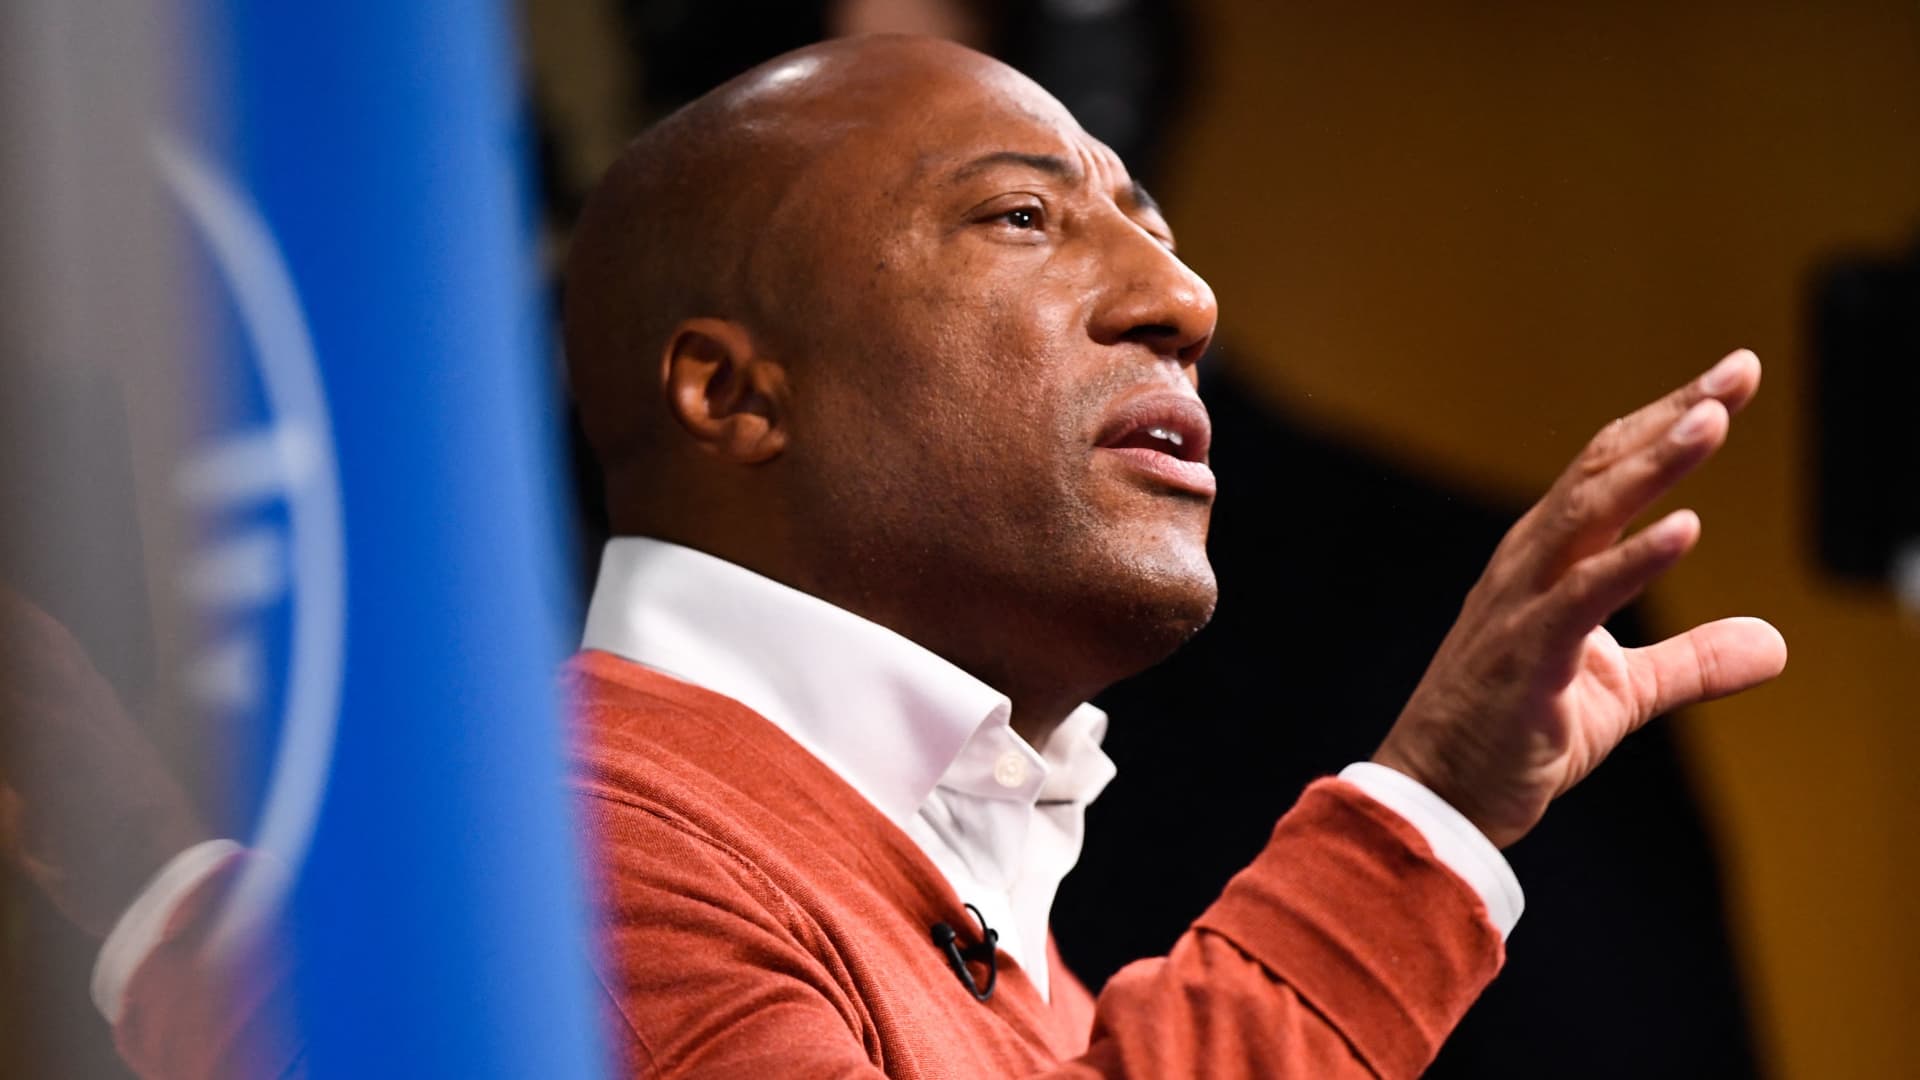 Byron Allen, founder, chairman, and CEO of Entertainment Studios and Allen Media Group, speaks during the Milken Institute Global Conference in Beverly Hills, California, on May 2, 2022. 